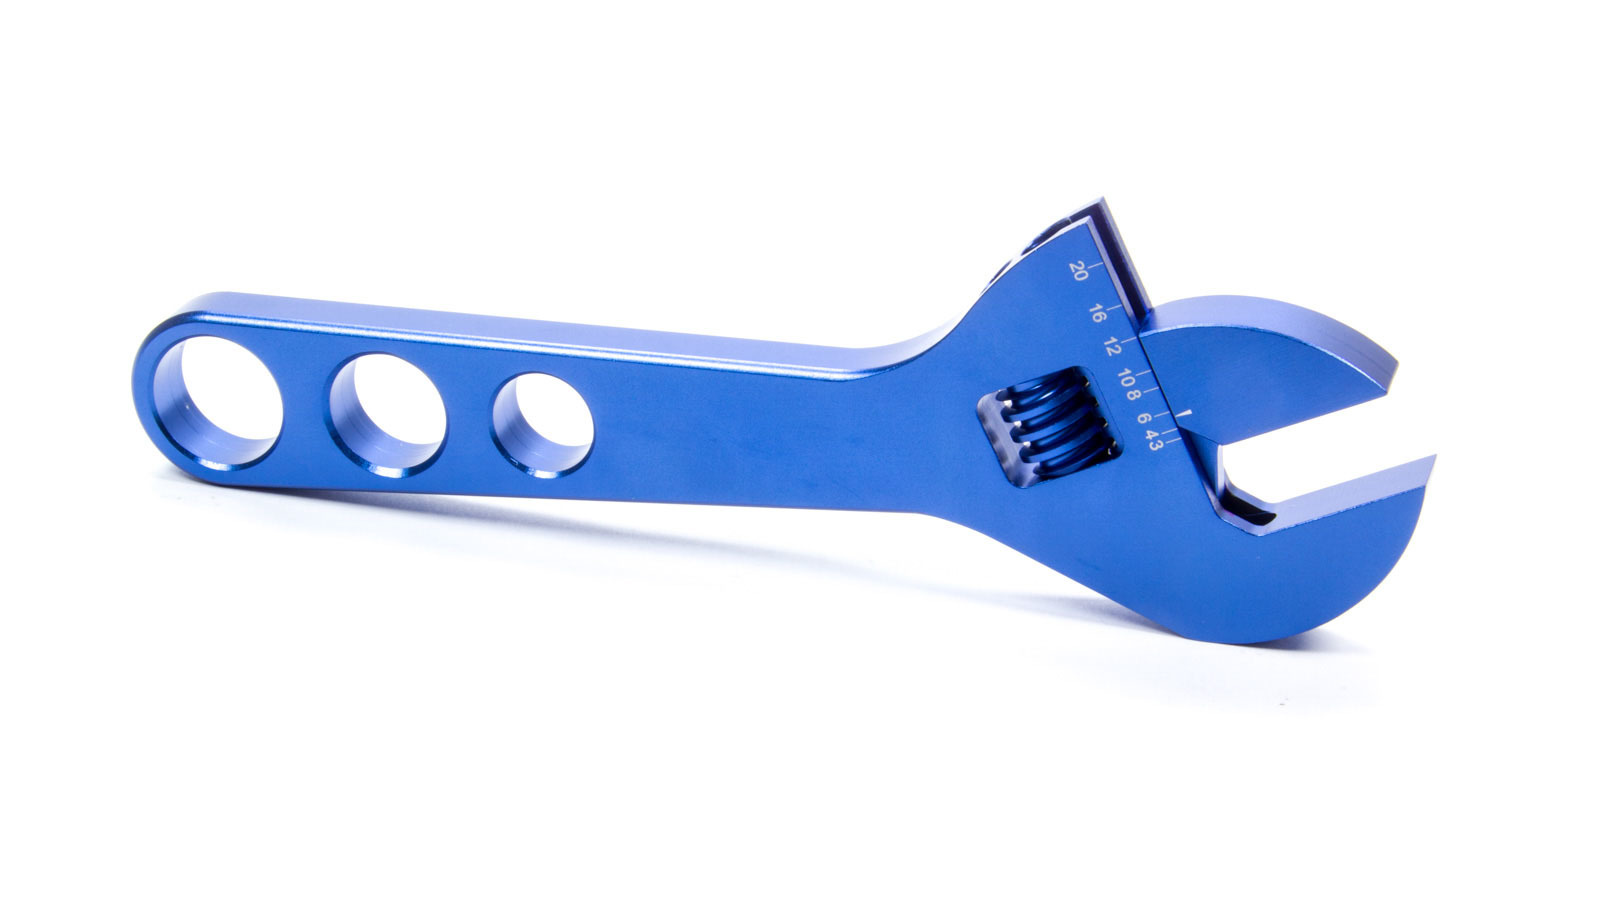 Proform 67728 Adjustable AN Wrench, Single End, 10 AN to 20 AN, Billet Aluminum, Blue Anodized, Each